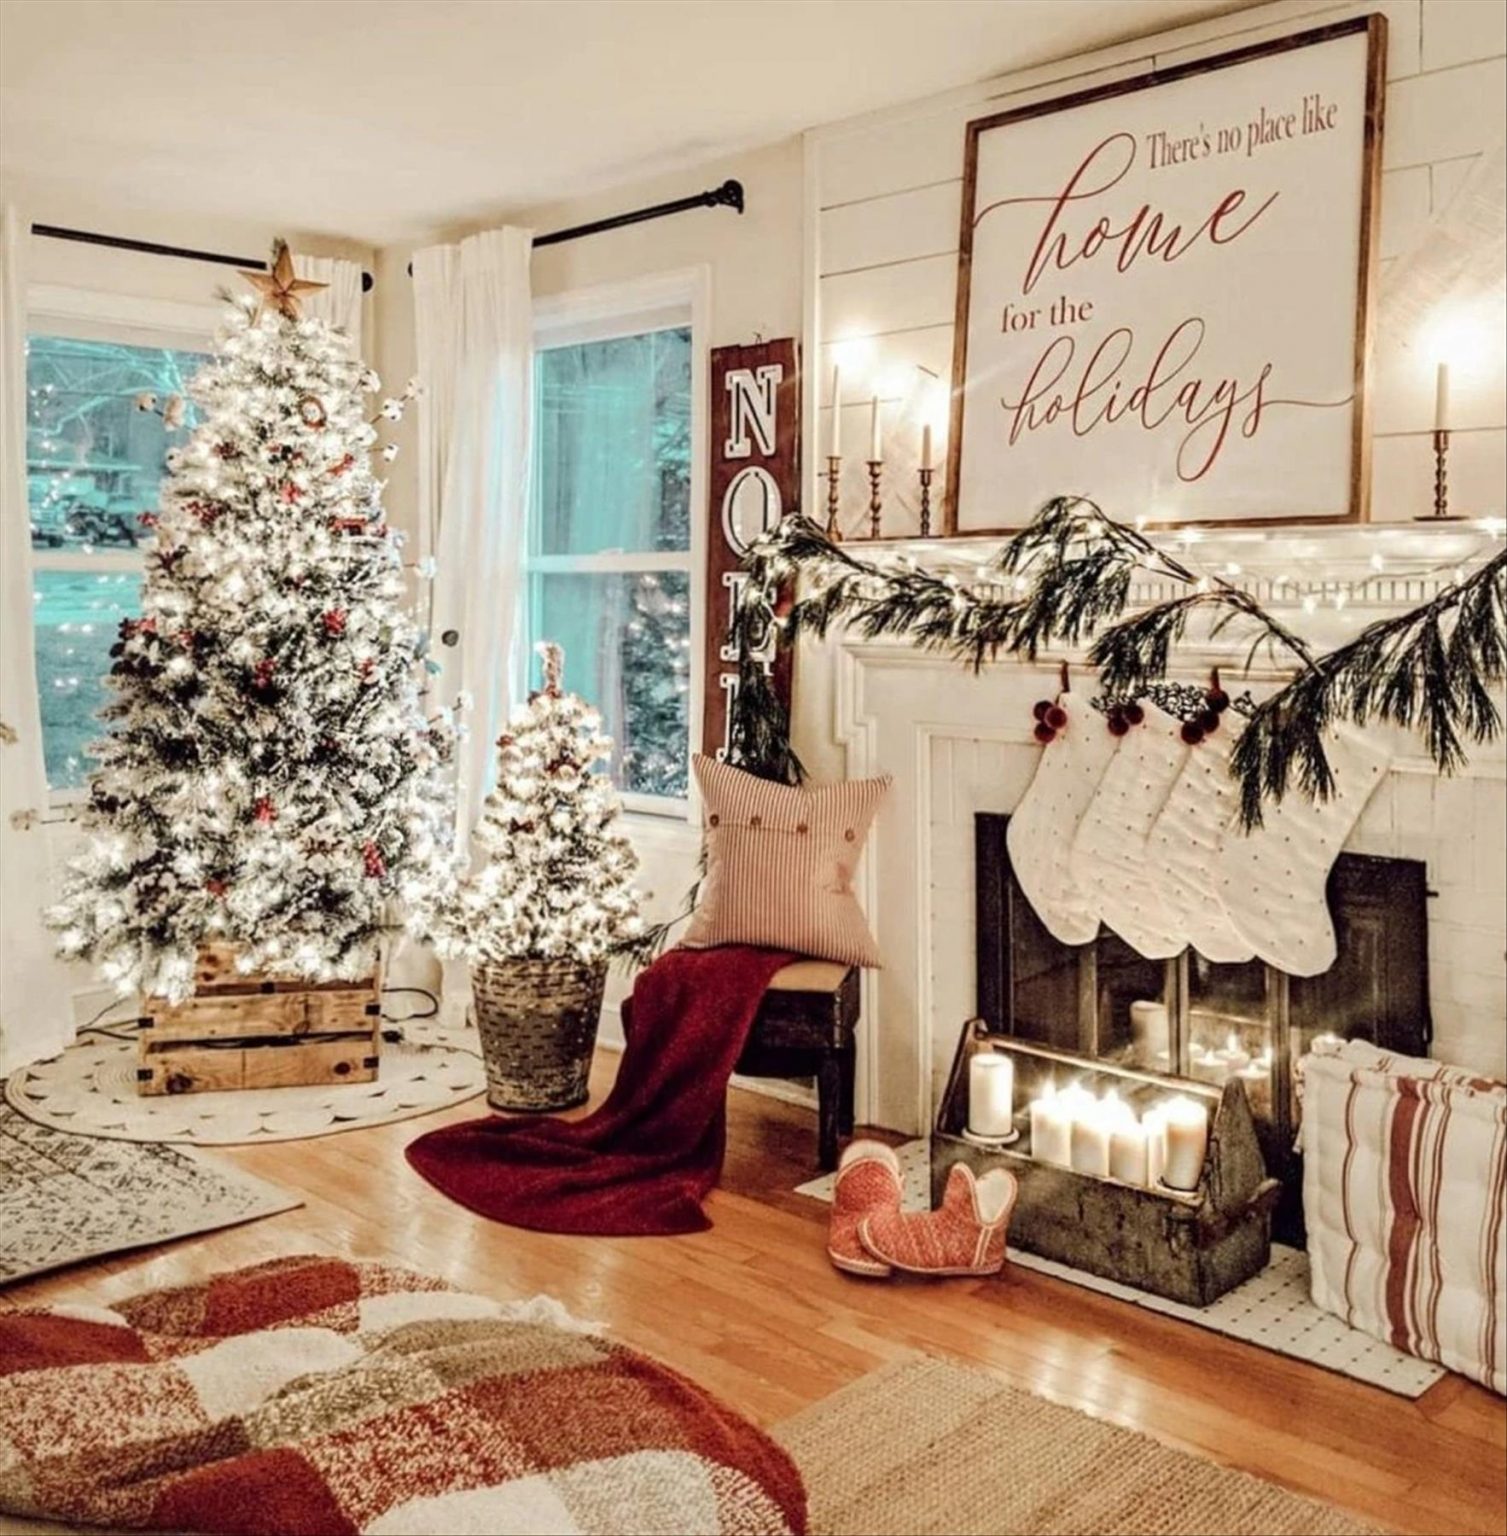 27 Cool Christmas decorating ideas to upgrade home - Lilyart